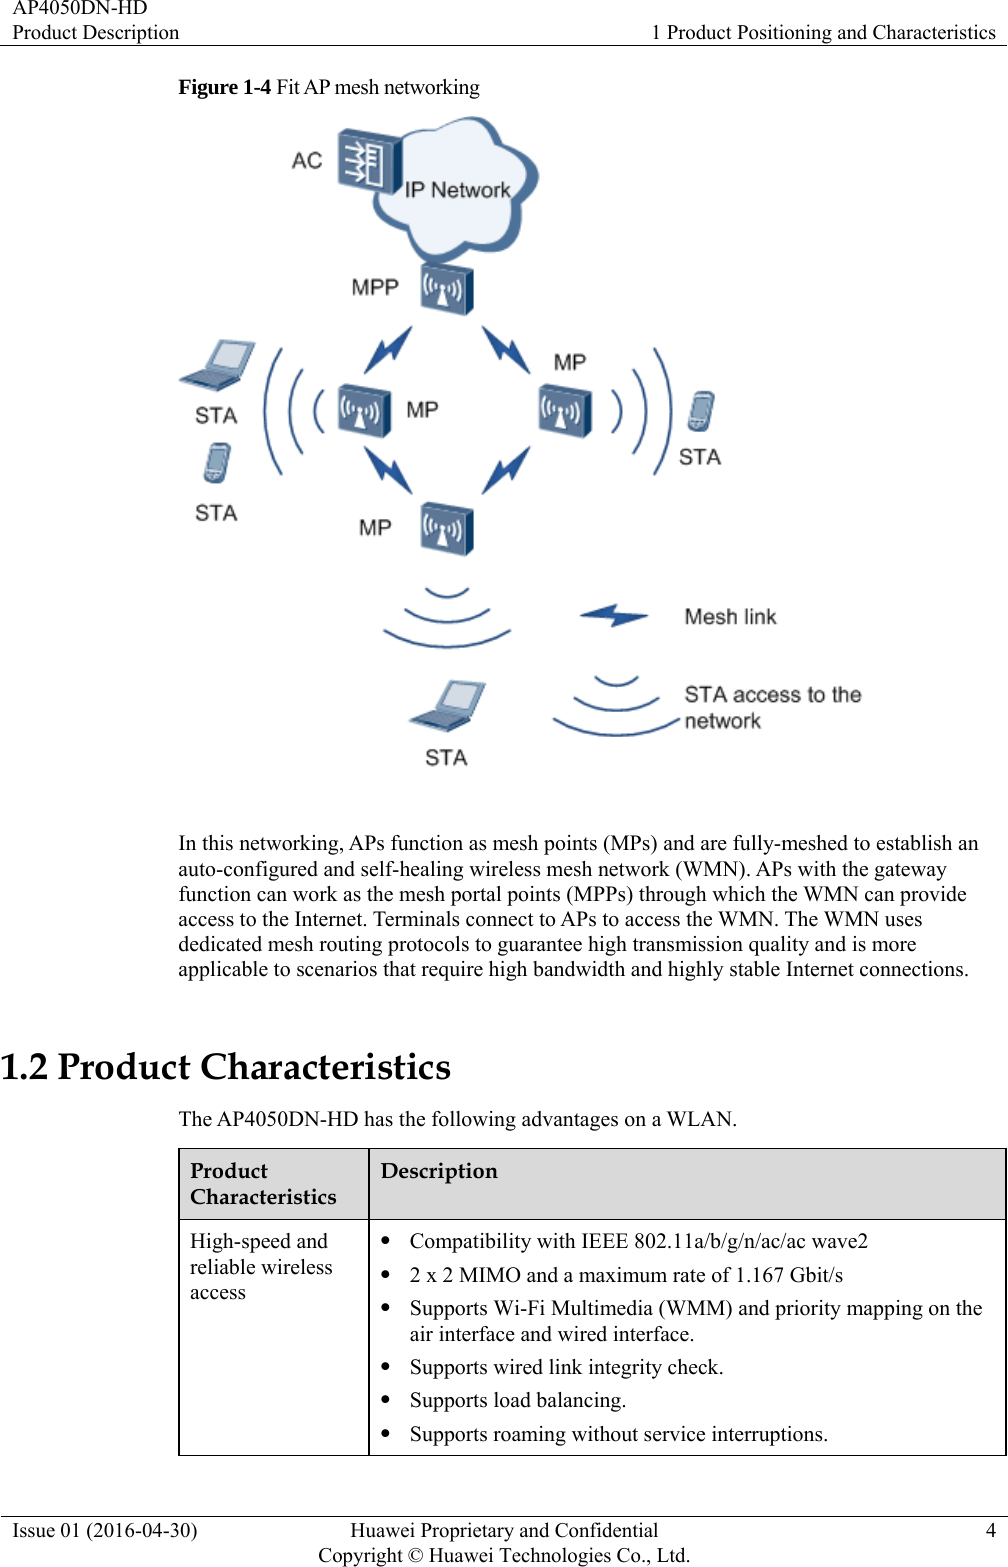 AP4050DN-HD Product Description  1 Product Positioning and Characteristics Issue 01 (2016-04-30)  Huawei Proprietary and Confidential         Copyright © Huawei Technologies Co., Ltd.4 Figure 1-4 Fit AP mesh networking   In this networking, APs function as mesh points (MPs) and are fully-meshed to establish an auto-configured and self-healing wireless mesh network (WMN). APs with the gateway function can work as the mesh portal points (MPPs) through which the WMN can provide access to the Internet. Terminals connect to APs to access the WMN. The WMN uses dedicated mesh routing protocols to guarantee high transmission quality and is more applicable to scenarios that require high bandwidth and highly stable Internet connections. 1.2 Product Characteristics The AP4050DN-HD has the following advantages on a WLAN. Product Characteristics Description High-speed and reliable wireless access  Compatibility with IEEE 802.11a/b/g/n/ac/ac wave2  2 x 2 MIMO and a maximum rate of 1.167 Gbit/s  Supports Wi-Fi Multimedia (WMM) and priority mapping on the air interface and wired interface.  Supports wired link integrity check.  Supports load balancing.  Supports roaming without service interruptions. 